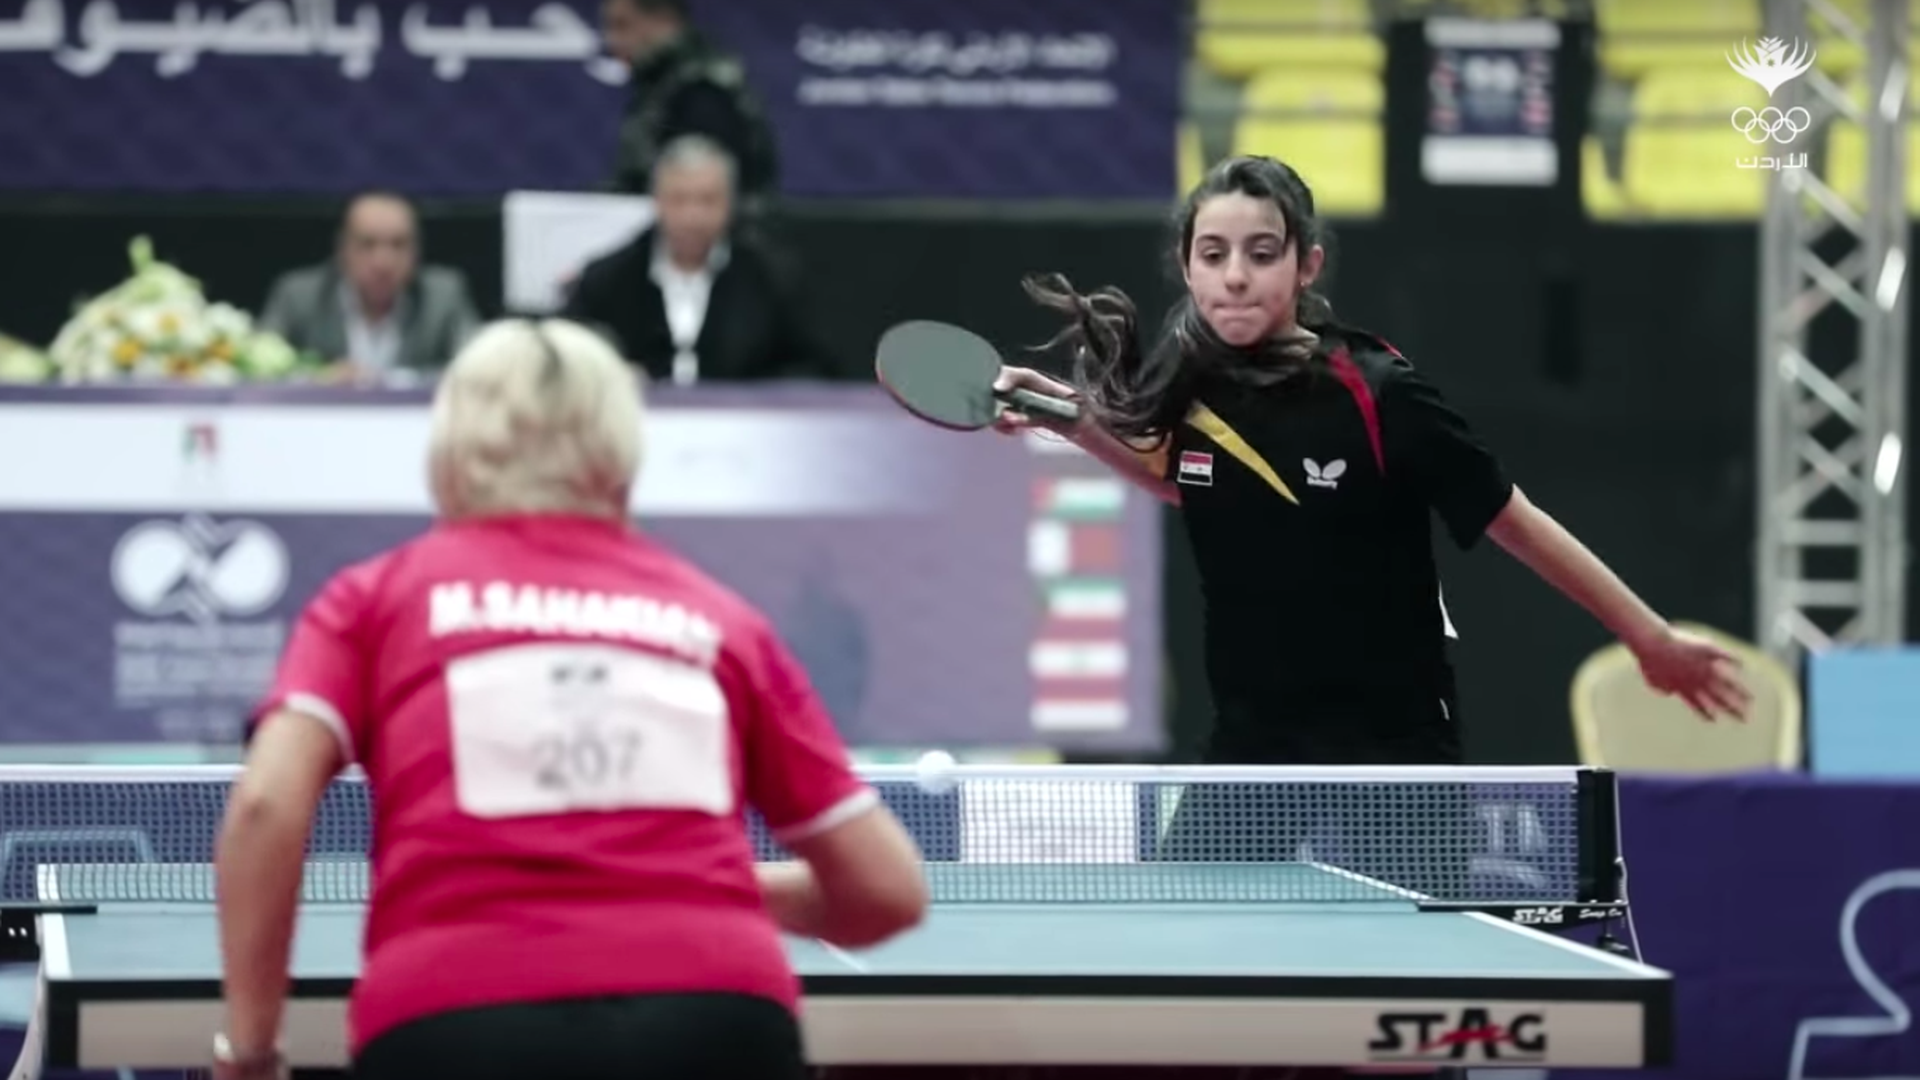 Pidgin Geef rechten sociaal 11-year-old Syrian table tennis player set to become youngest athlete at  2020 Olympics - Axios